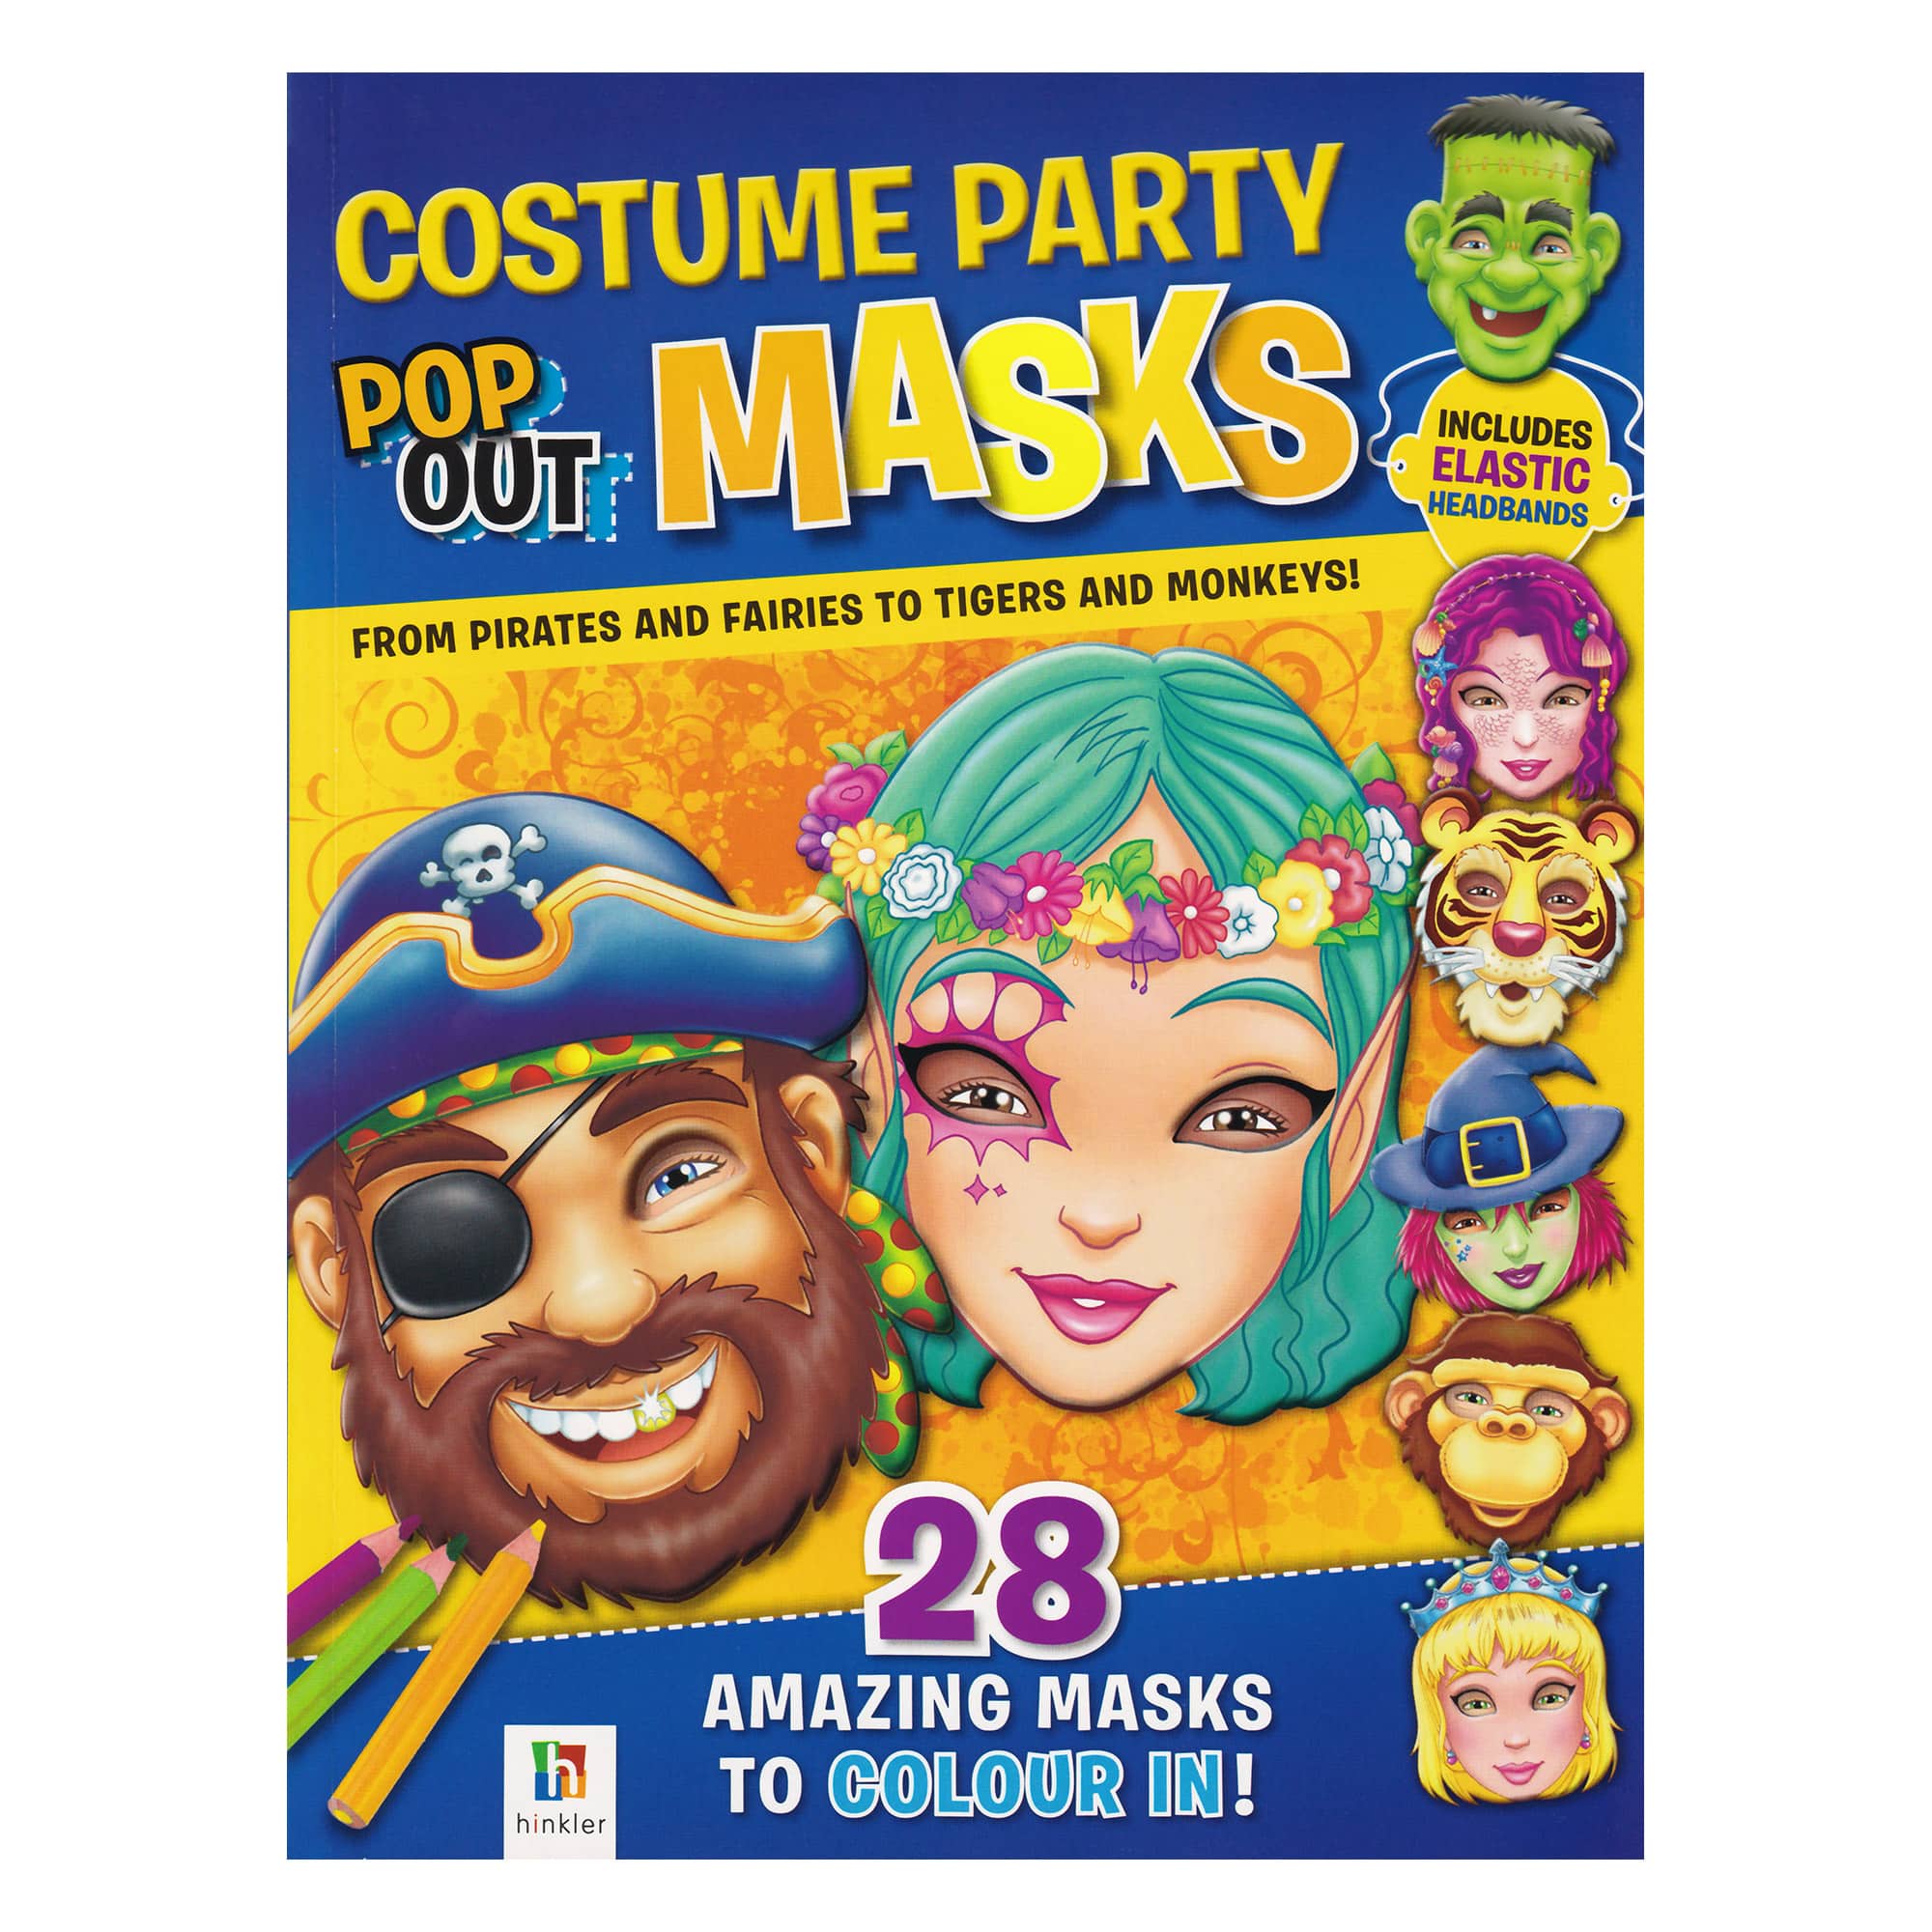 Costume Party Pop Out Masks